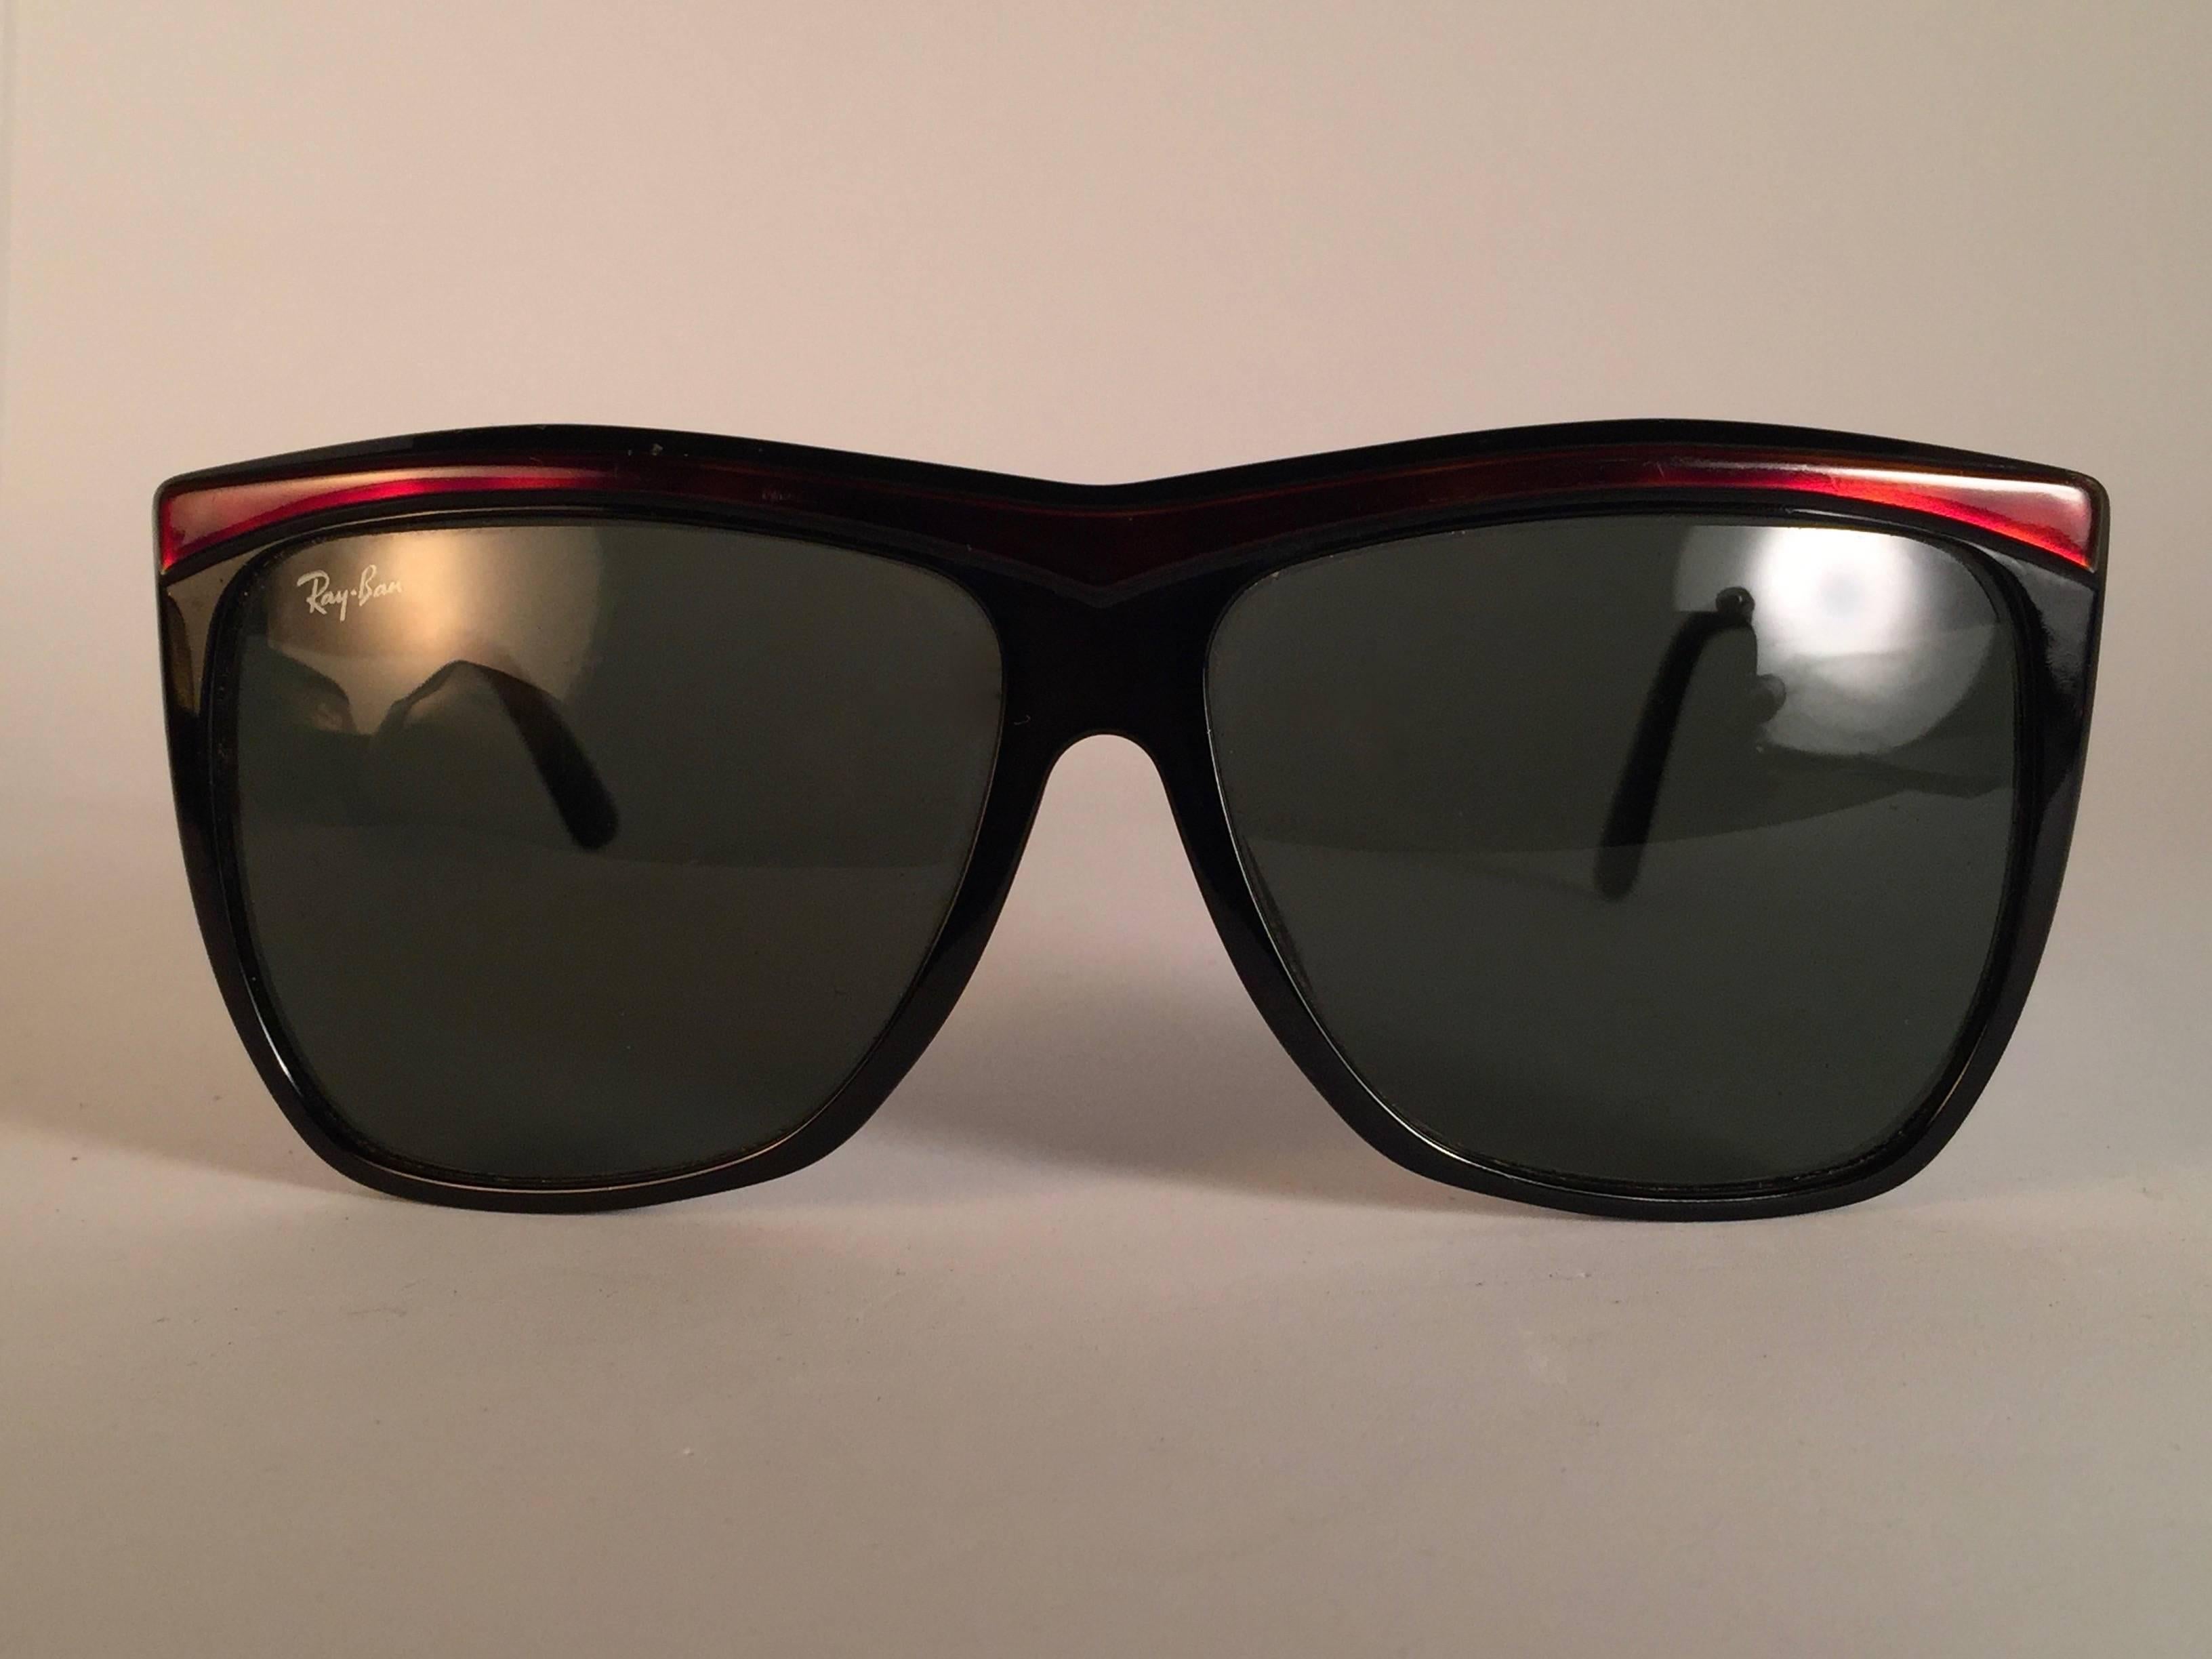 New classic Ray Ban WO 353 in tortoise. B&L etched in both G15 grey lenses. Please notice that this item is nearly 40 years old and could show some storage wear. New, ever worn or displayed. Made in USA.